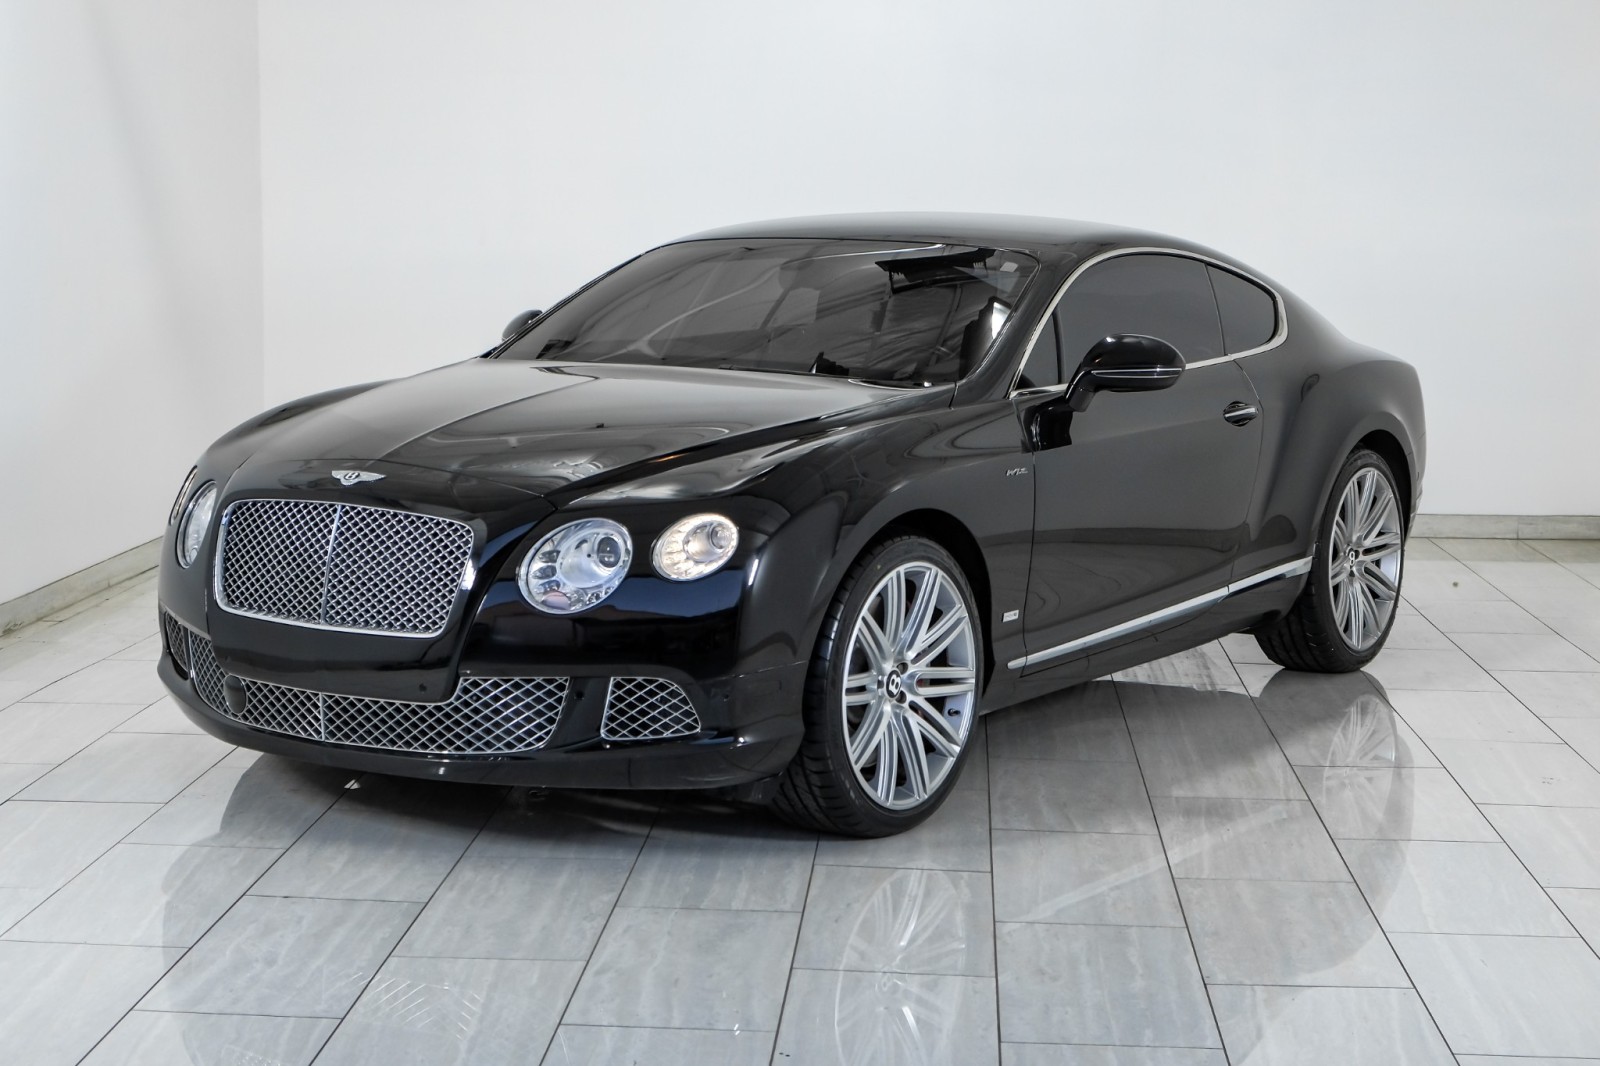 2013 Bentley Continental GT COUPE AWD W12 LA MANS EDITION 1 OF 48 NAVIGATION B 6